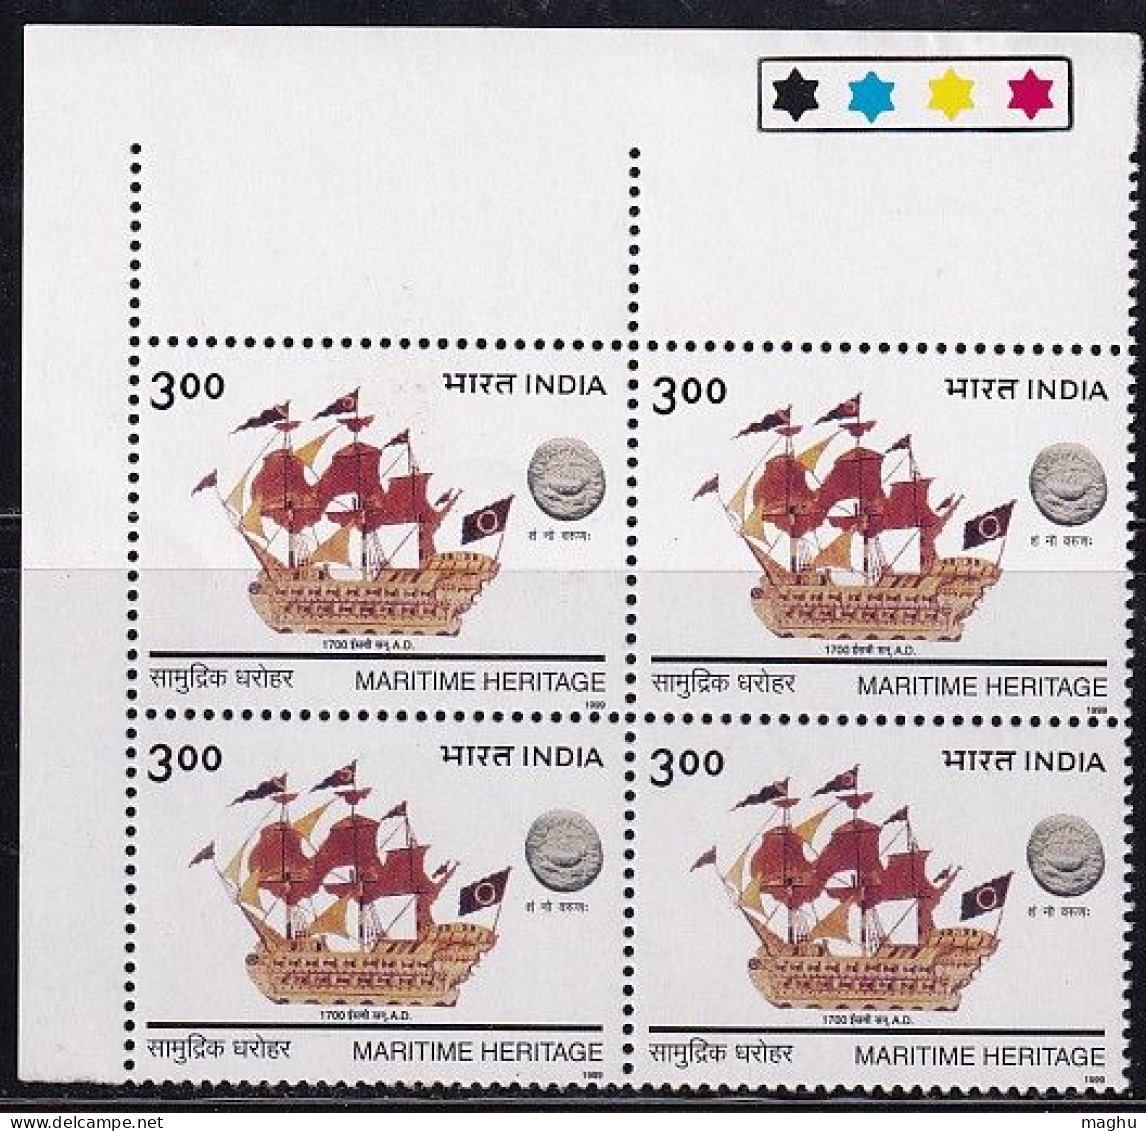 T/L Block,  India MNH 1999, Maritime Heritage, History, Terractta Model Boat 1700 AD Ship, Lead Coin, Mineral, Flag, - Hojas Bloque